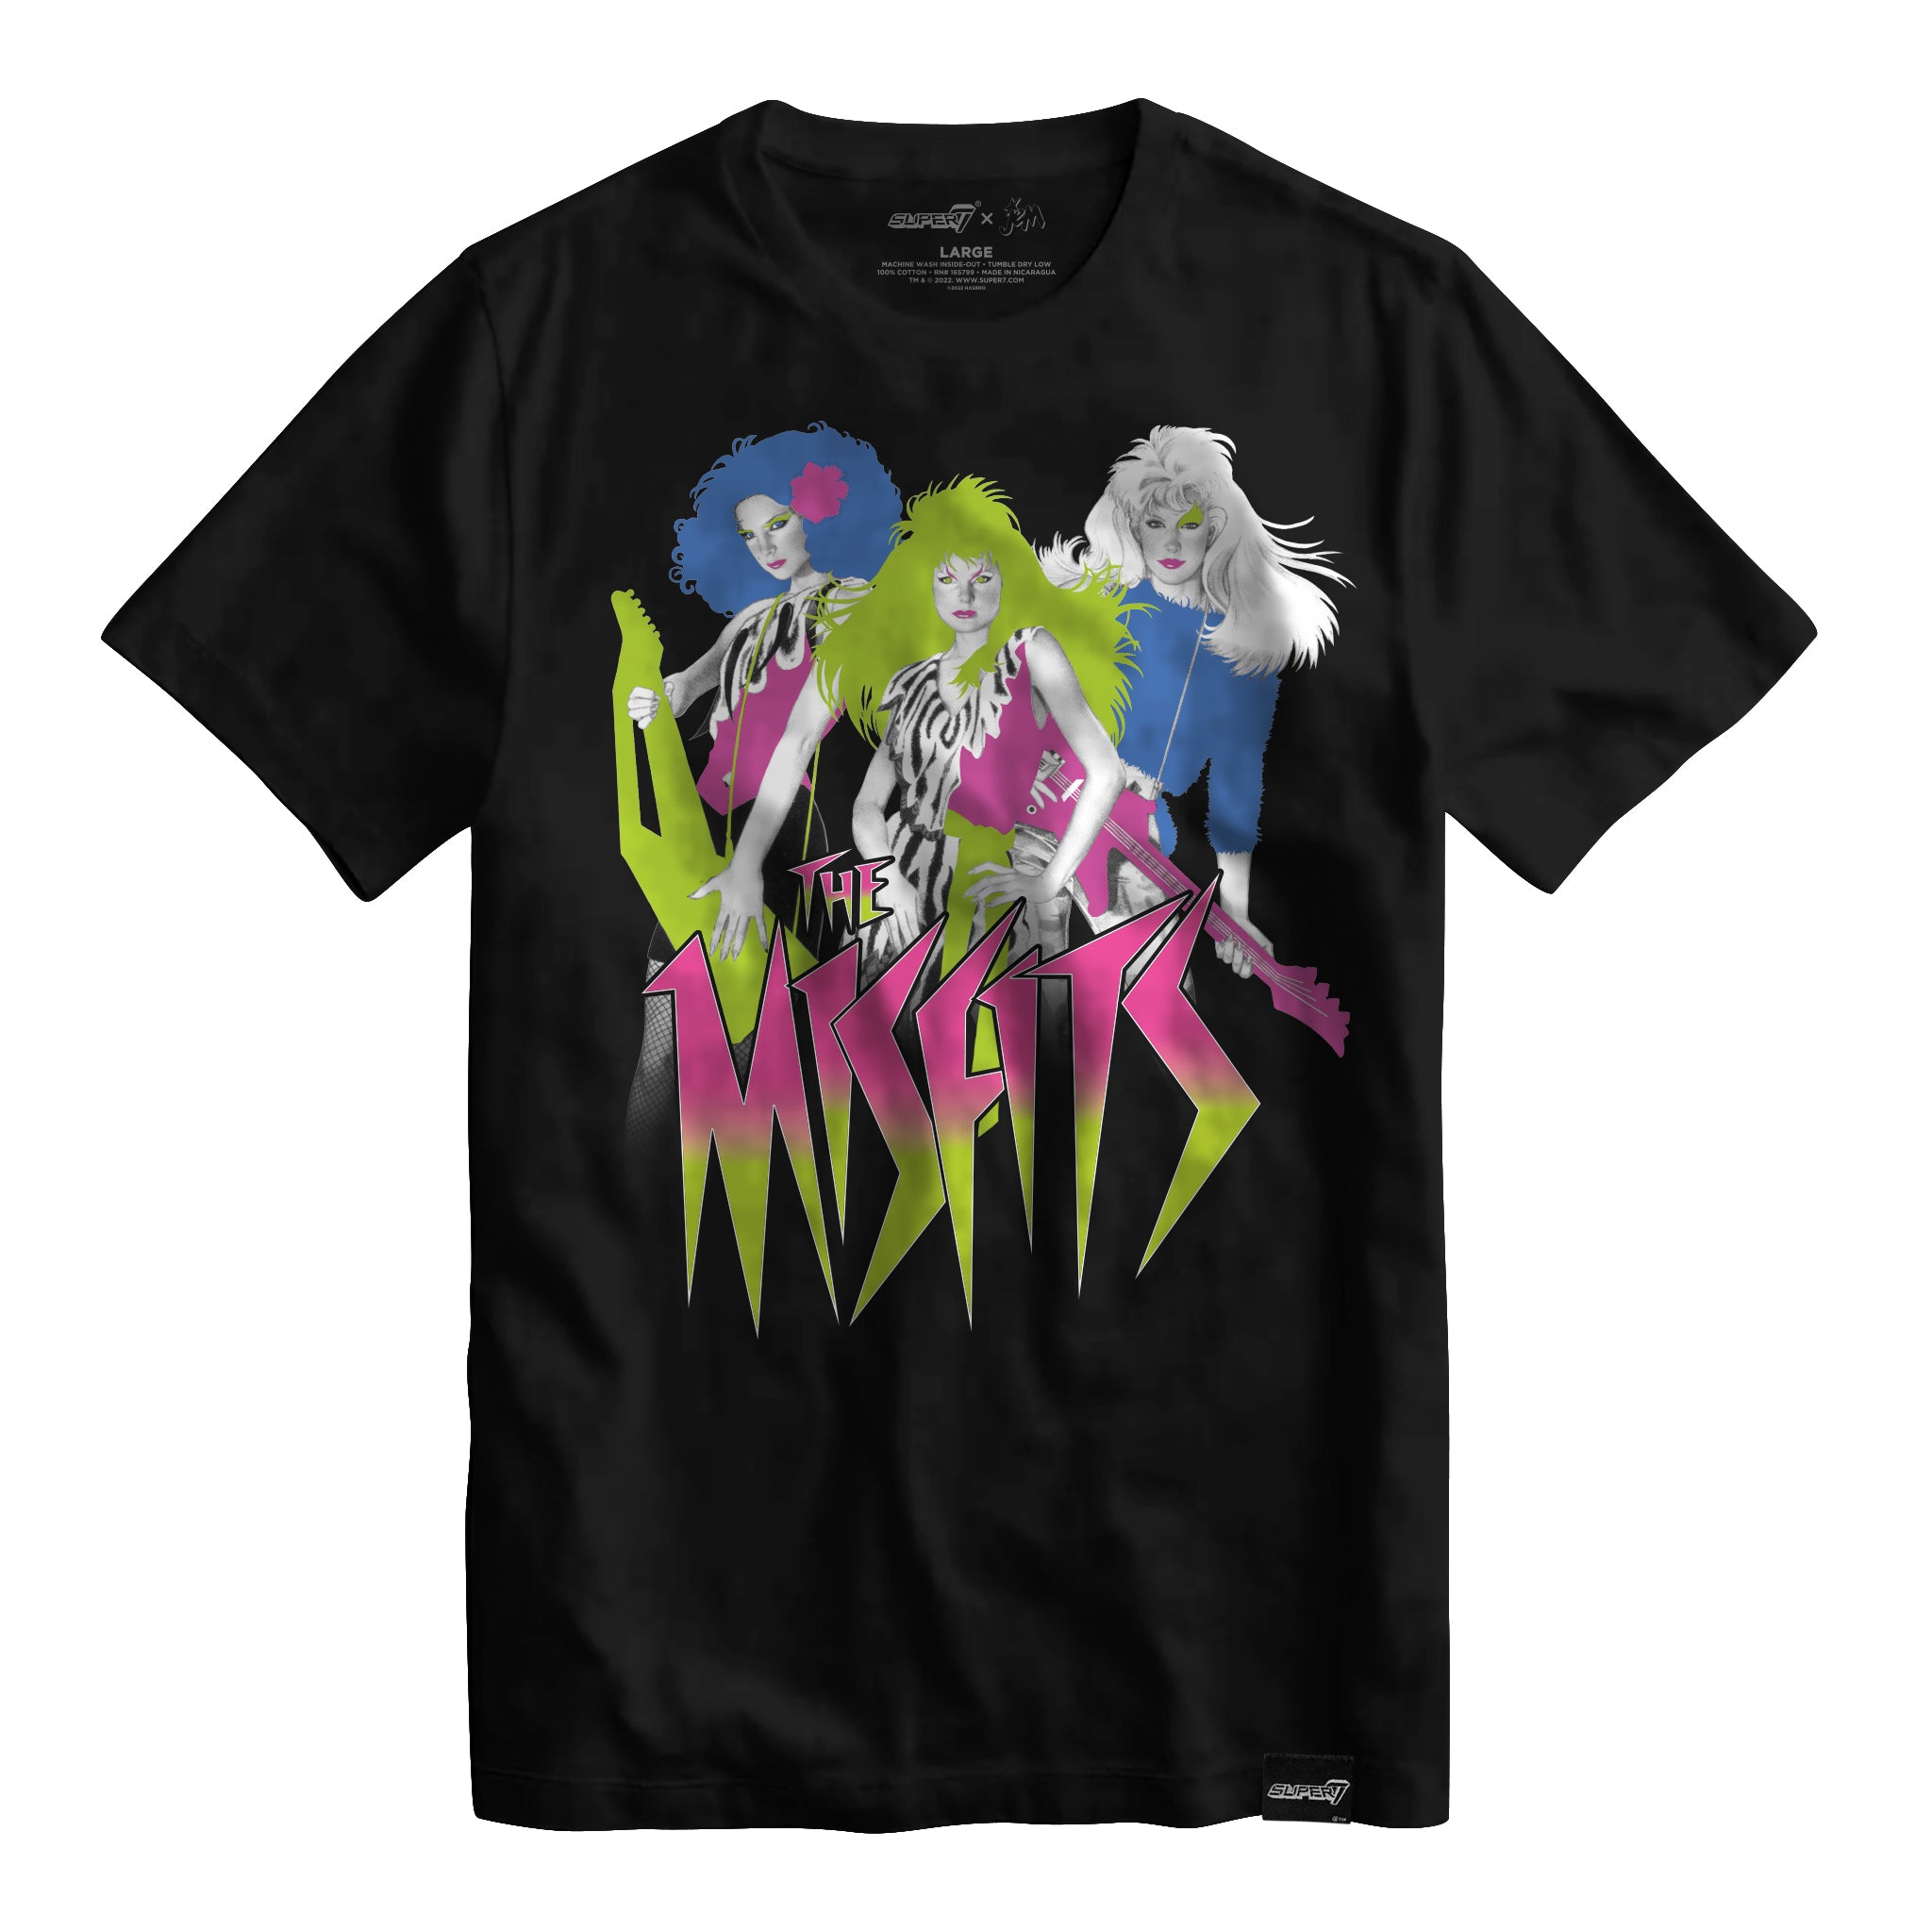 Jem and The Holograms - The Misfits Tour T-shirt